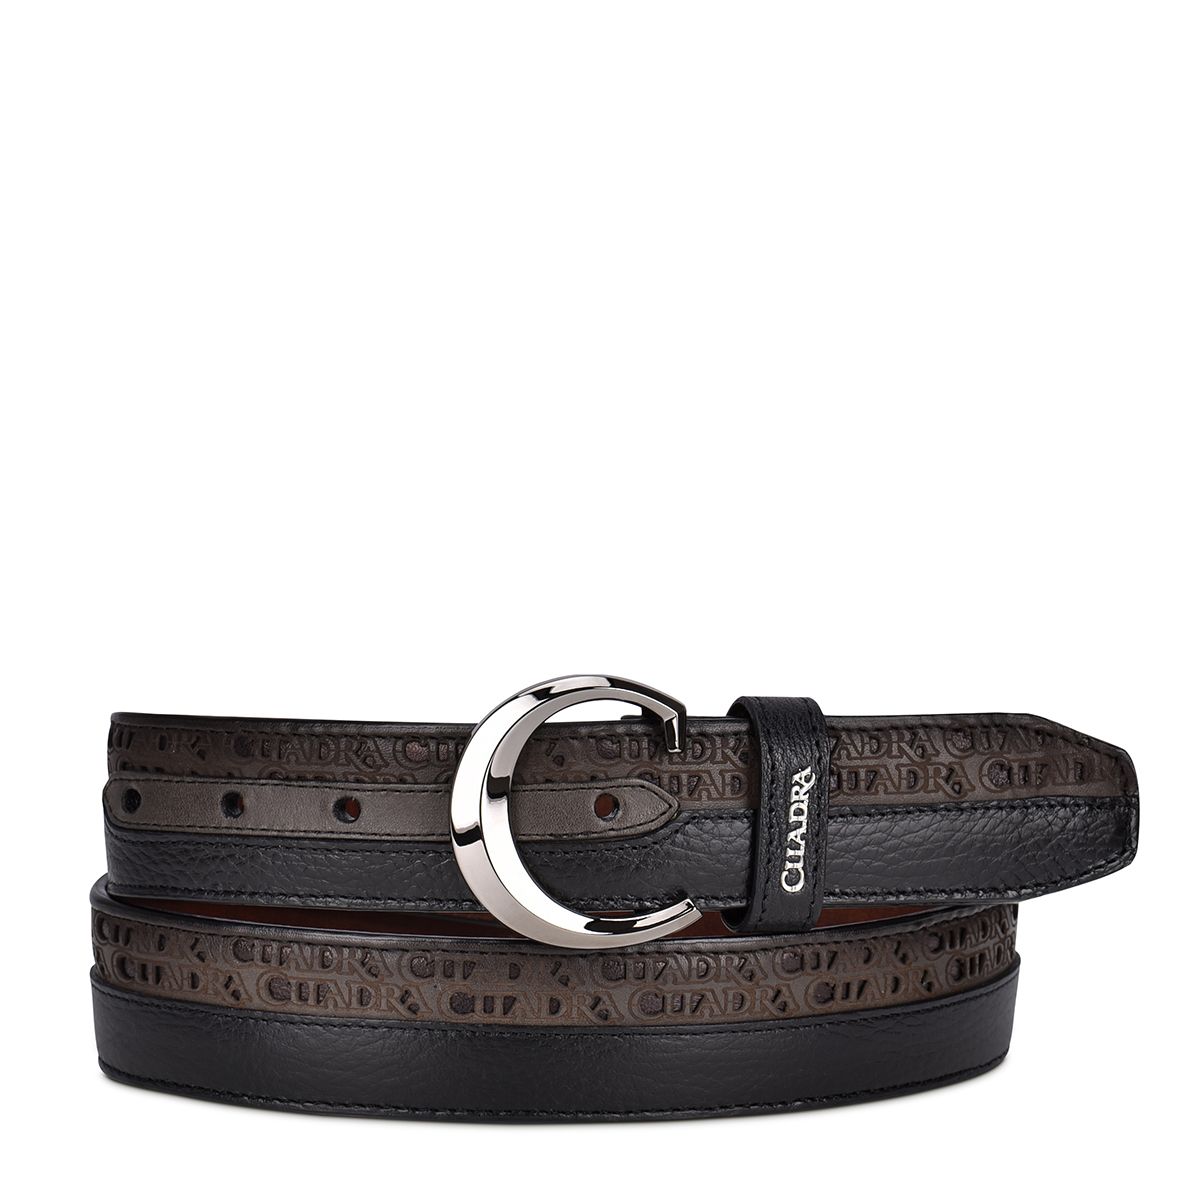 CS321RS - Cuadra oxford casual western cowhide leather belt for men.-Kuet.us